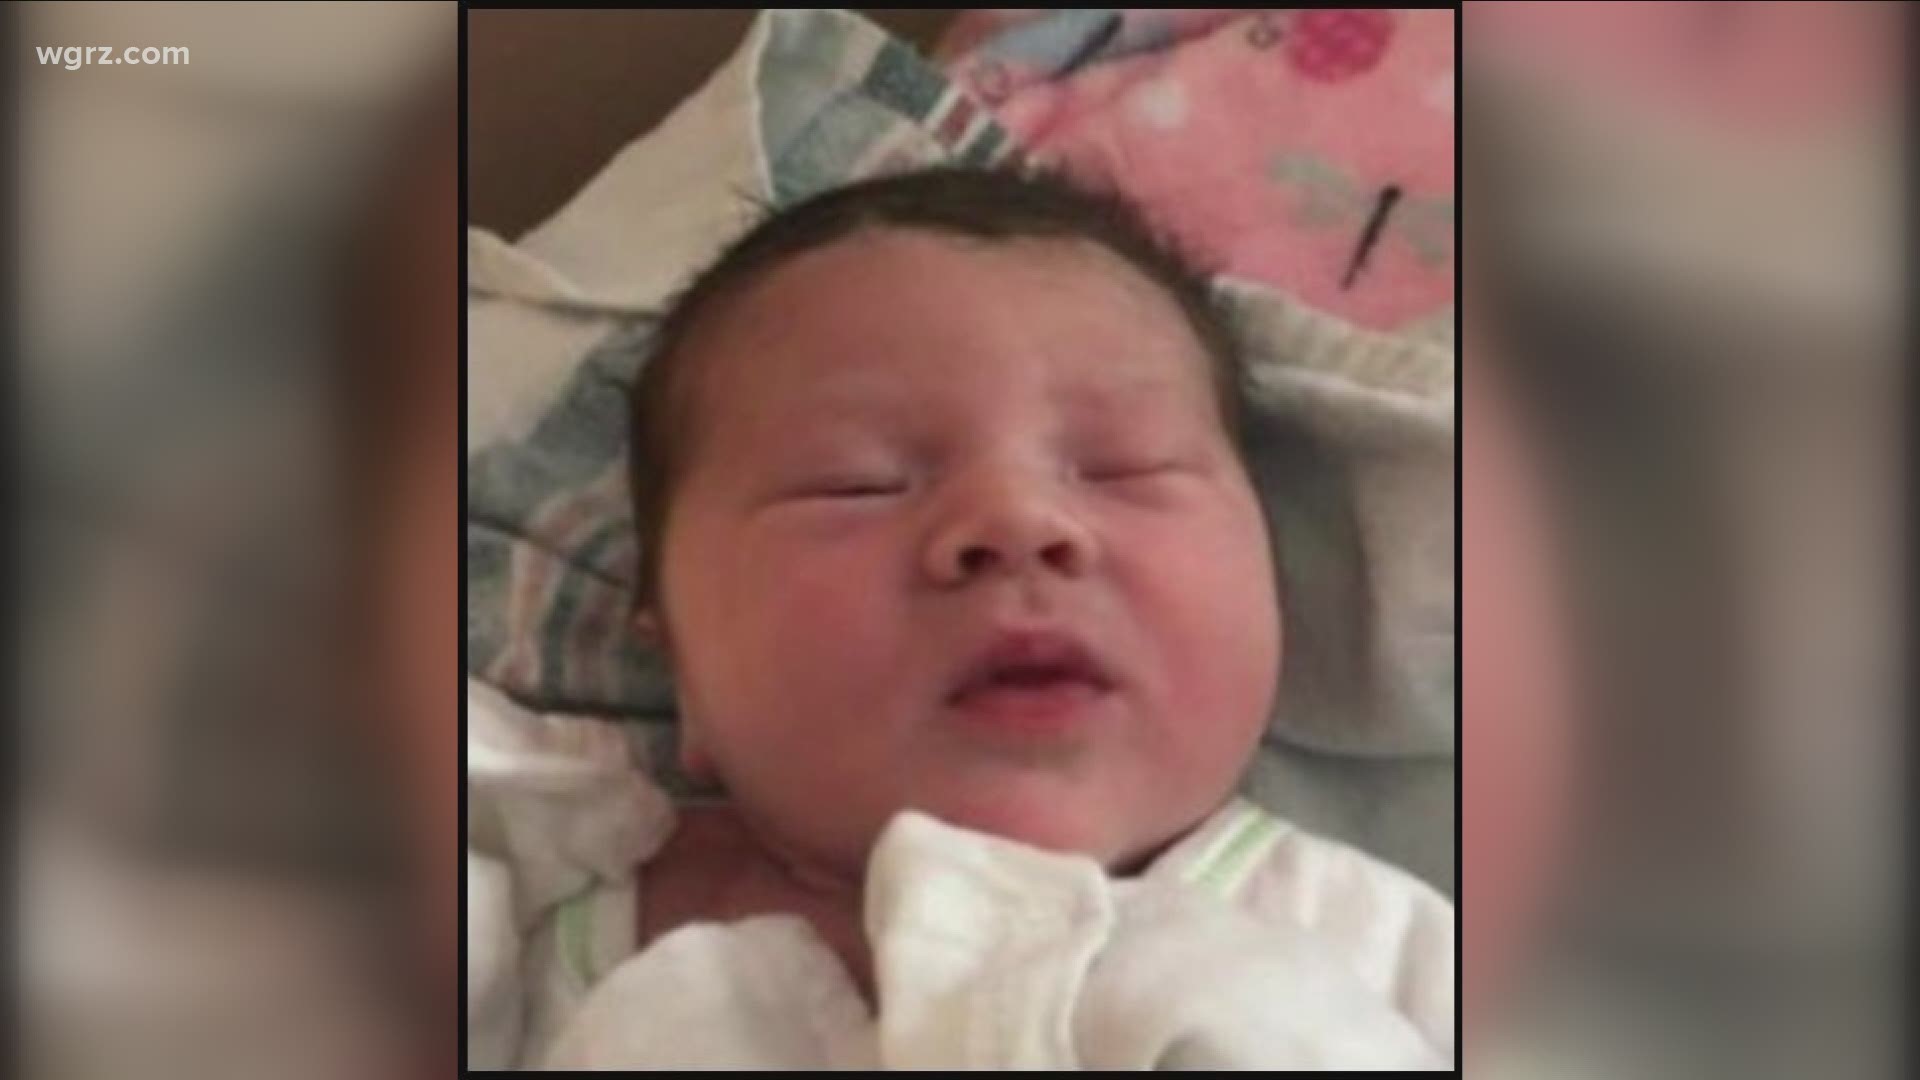 The Orleans County Sheriff's Office issued that amber alert saying police were looking for Natalie Huntington, a two month old baby girl.